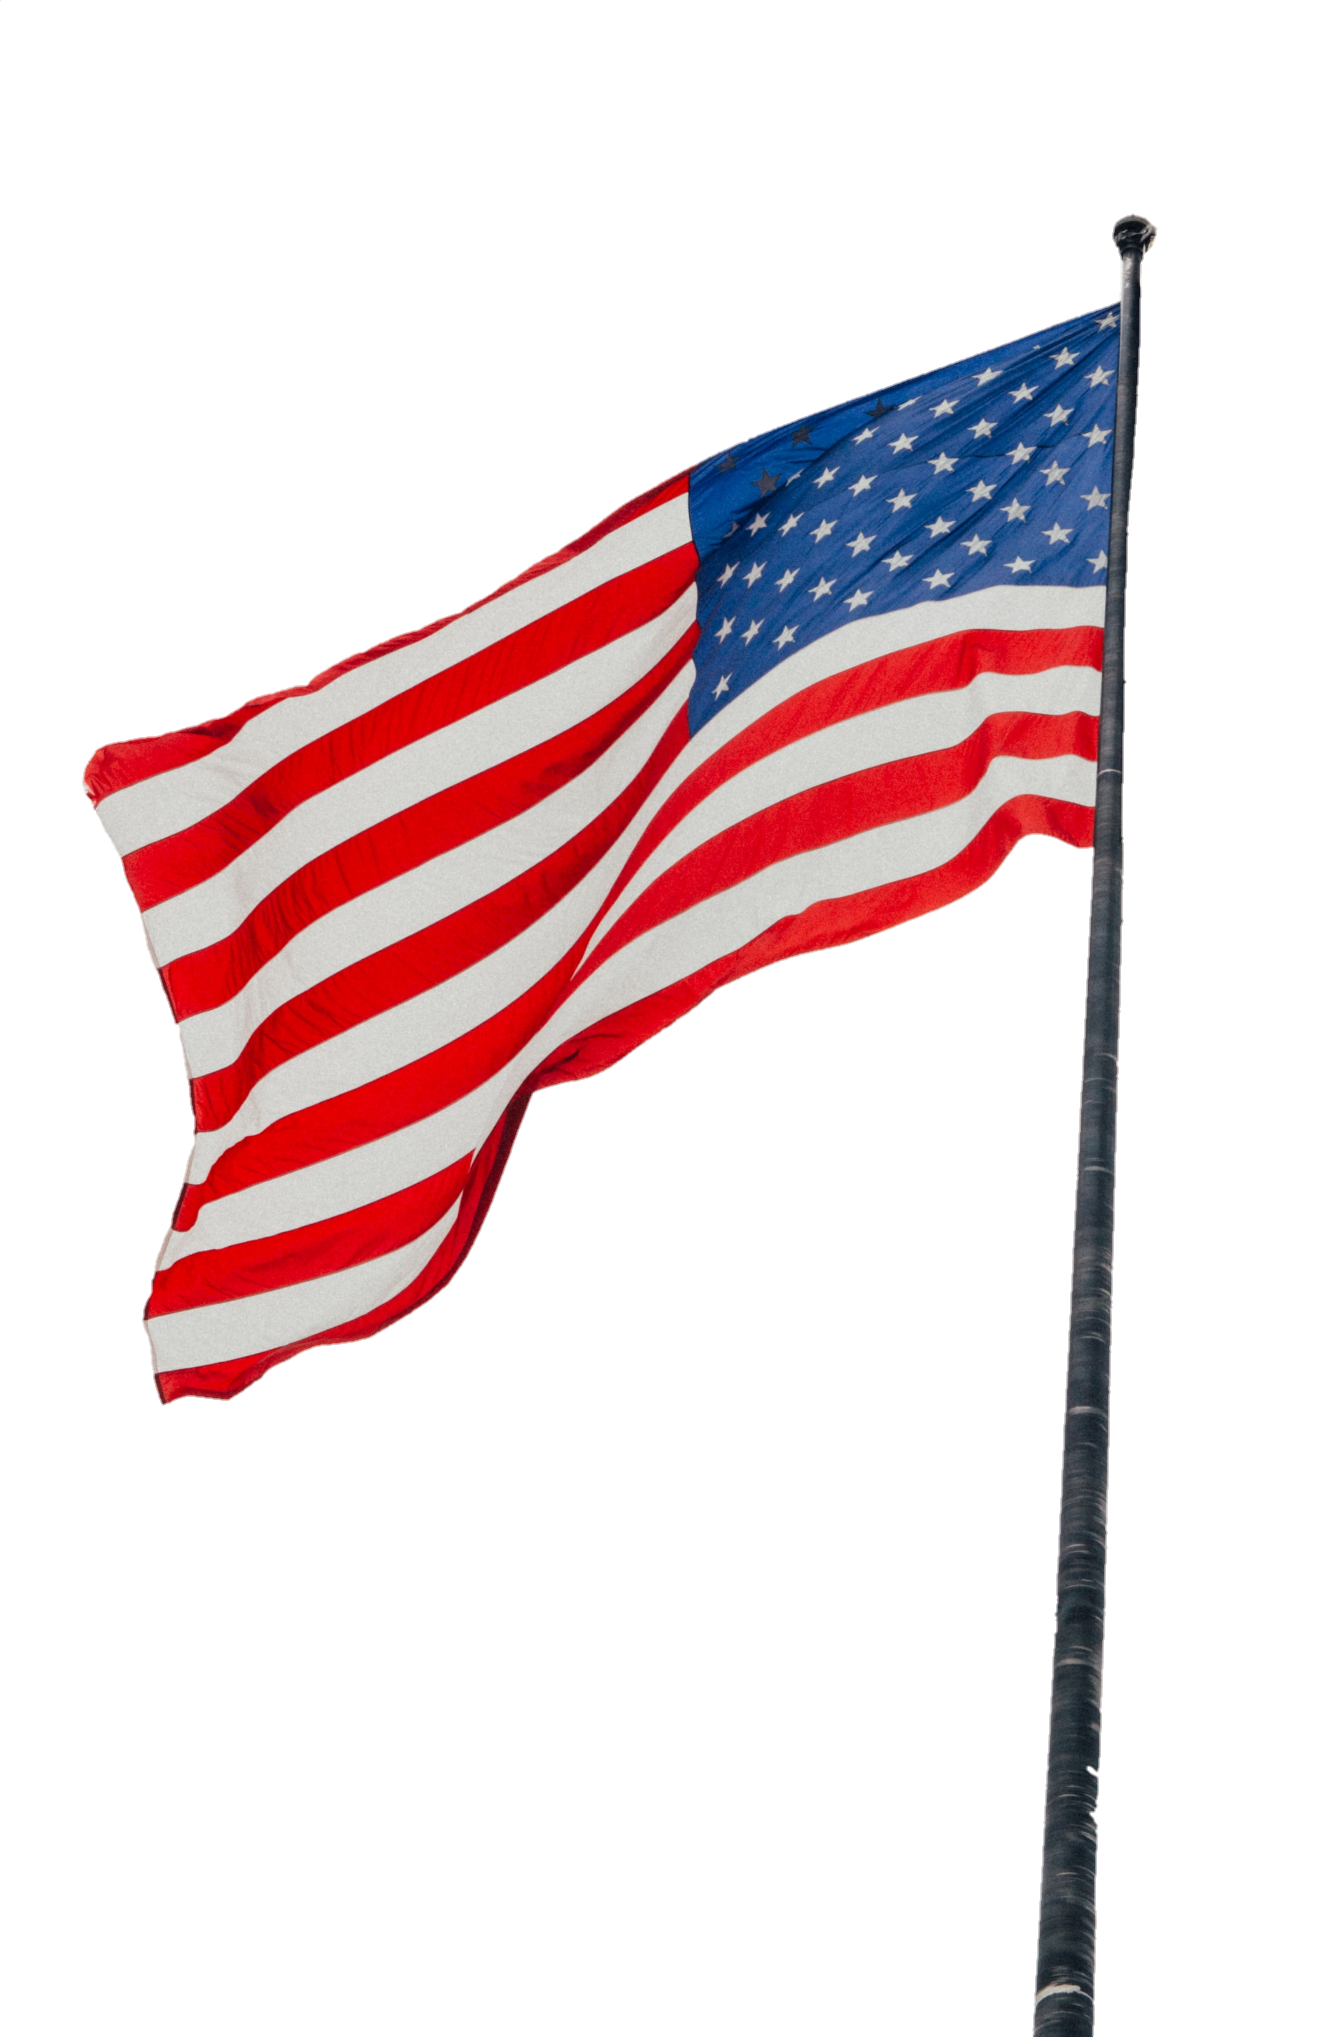 american-flag-png-image-pngfre-6